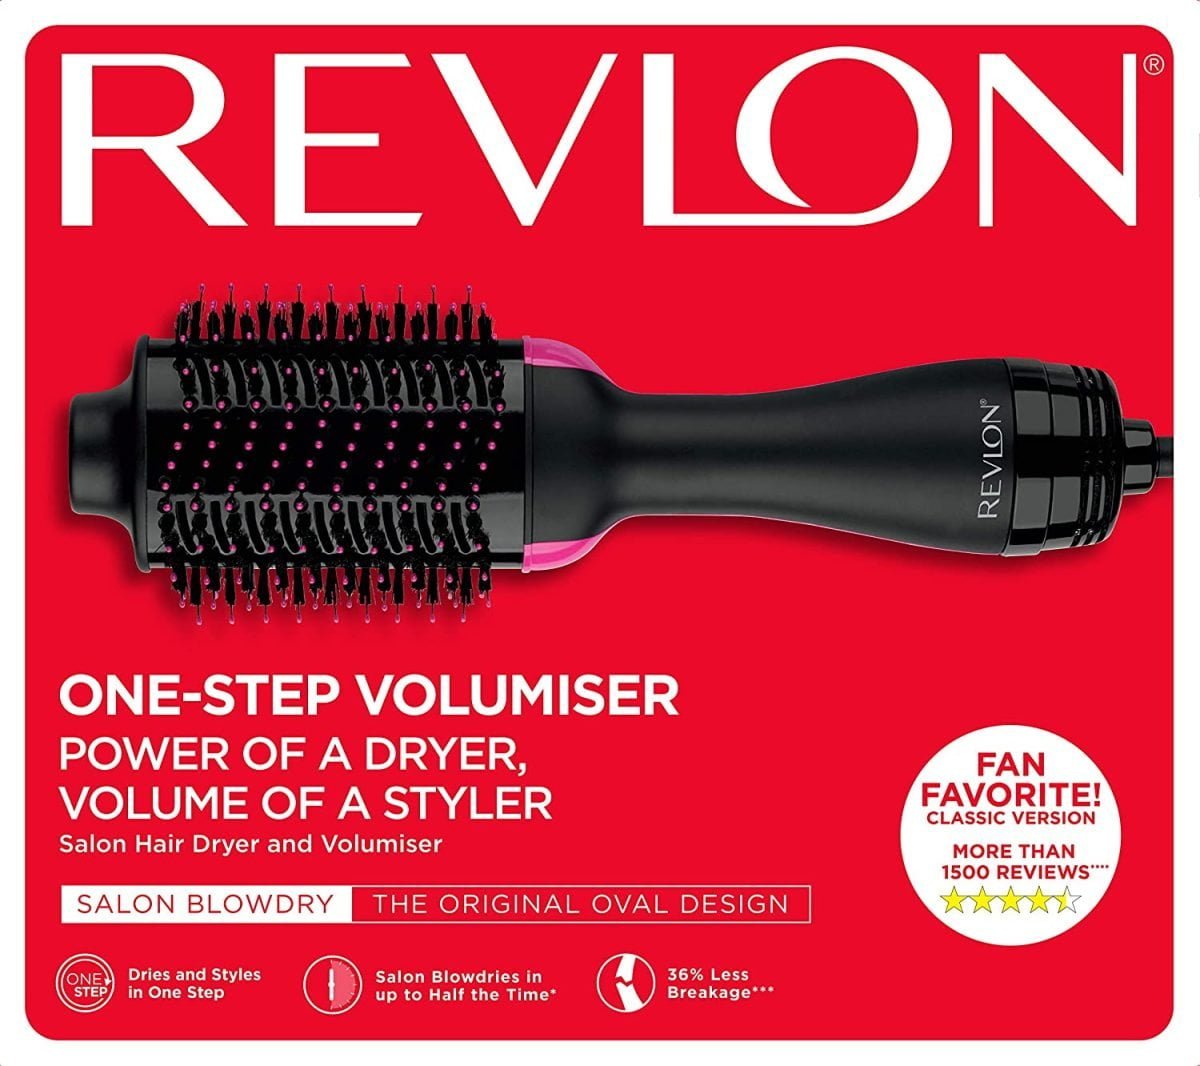 81Agocsl7L. Ac Sl1500 Revlon The Revlon One-Step Hair Dryer And Volumizer Is A Designed Hot Air Brush To Deliver Gorgeous Volume And Brilliant Shine In A Single Step. The Unique Oval Brush Design Smooth Hair While The Rounded Edges Quickly Create Volume At The Root And Beautifully Full-Bodied Curls At The Ends In A Single Pass, For Salon Blowouts At Home. &Lt;Ul&Gt; &Lt;Li&Gt;&Lt;Span Class=&Quot;A-List-Item&Quot;&Gt;A 2-In-1 Styling Tool That Gives The Power Of A Dryer And A Volume Of A Styler&Lt;/Span&Gt;&Lt;/Li&Gt; &Lt;Li&Gt;&Lt;Span Class=&Quot;A-List-Item&Quot;&Gt;Glides Through Your Hair To Detangle, Dry And Volumize In Half The Time. &Lt;/Span&Gt;&Lt;/Li&Gt; &Lt;Li&Gt;&Lt;Span Class=&Quot;A-List-Item&Quot;&Gt;The Oval Brush Creates Volume At Roots And Curled Ends&Lt;/Span&Gt;&Lt;/Li&Gt; &Lt;Li&Gt;&Lt;Span Class=&Quot;A-List-Item&Quot;&Gt;Boosted By Ionic Technology, Hair Dries Faster With Less Damage&Lt;/Span&Gt;&Lt;/Li&Gt; &Lt;Li&Gt;&Lt;Span Class=&Quot;A-List-Item&Quot;&Gt;2 Heat Settings Plus Cool Setting&Lt;/Span&Gt;&Lt;/Li&Gt; &Lt;Li&Gt;&Lt;Span Class=&Quot;A-List-Item&Quot;&Gt;Barrel Size Is 2 Inches | 1-Year Warranty | 220V - 240V&Lt;/Span&Gt;&Lt;/Li&Gt; &Lt;/Ul&Gt; Revlon Revlon Salon One-Step Hair Dryer And Volumizer